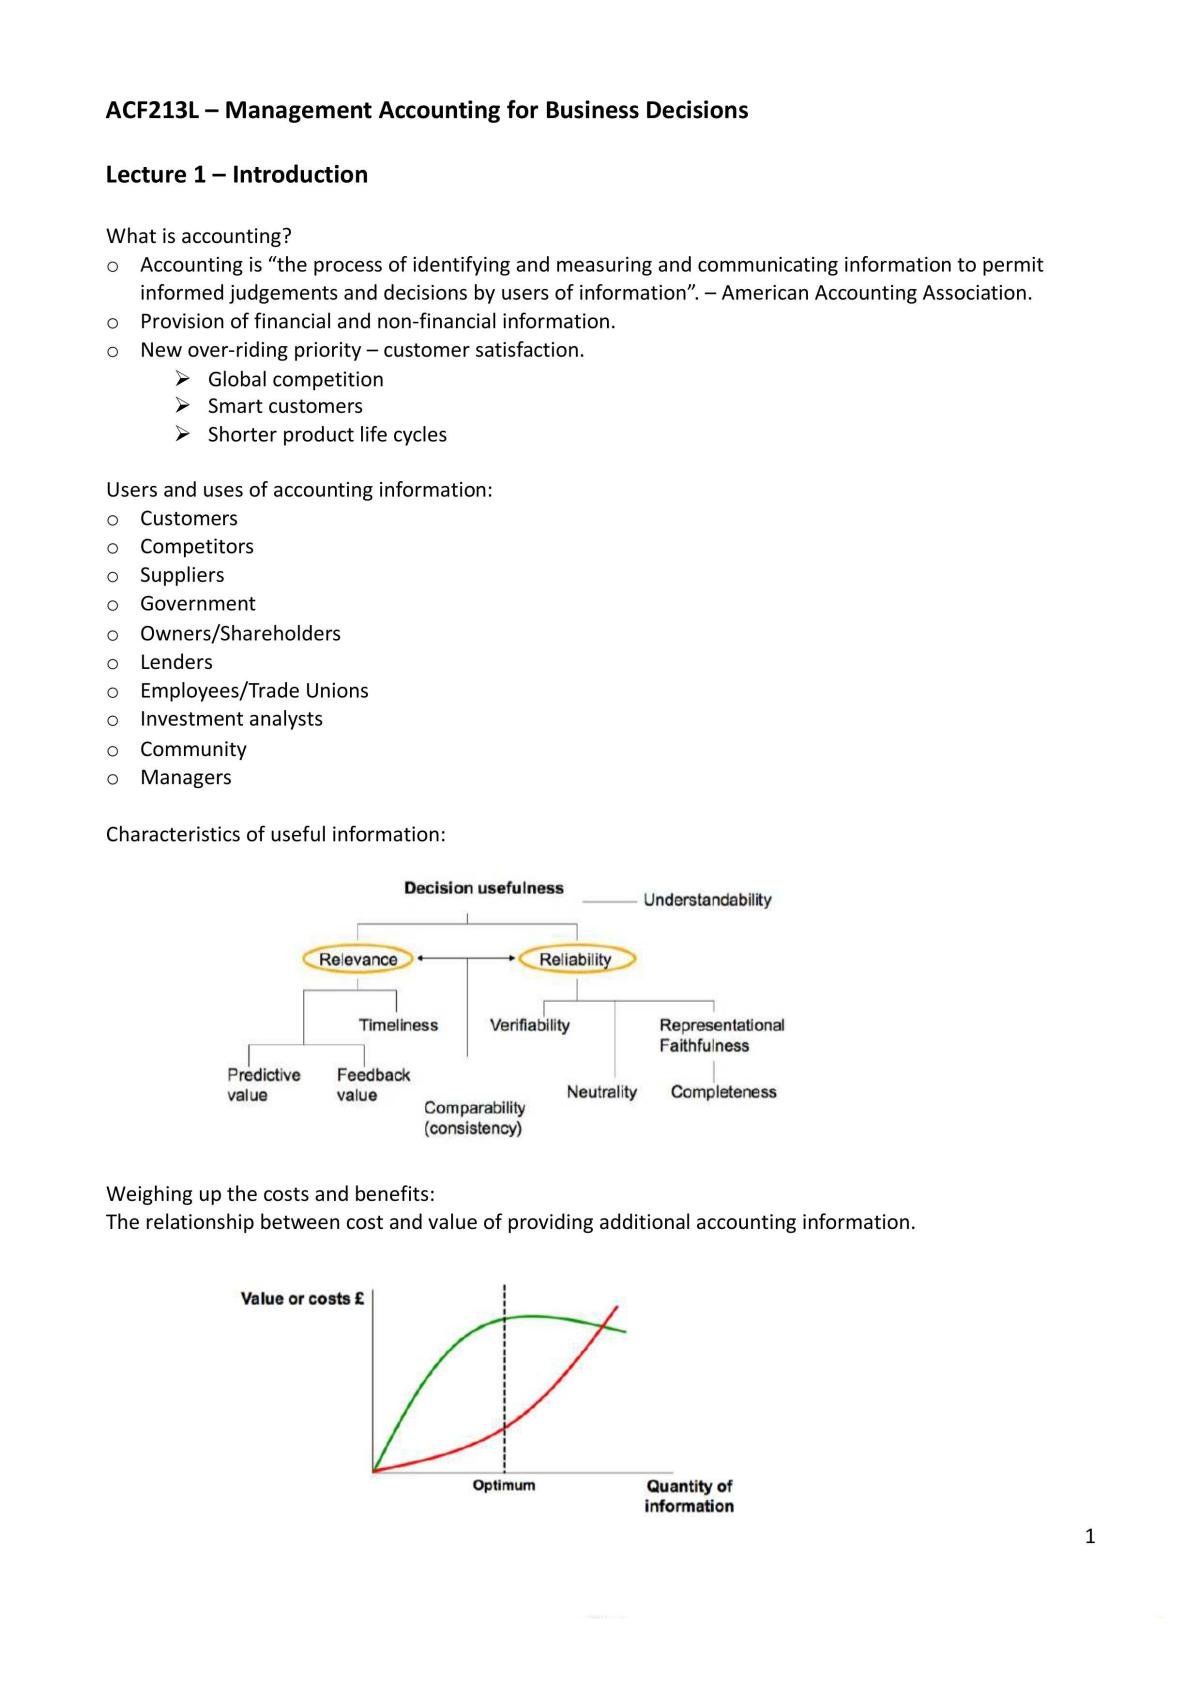 Management Accounting for Business Decisions Notes - Page 1